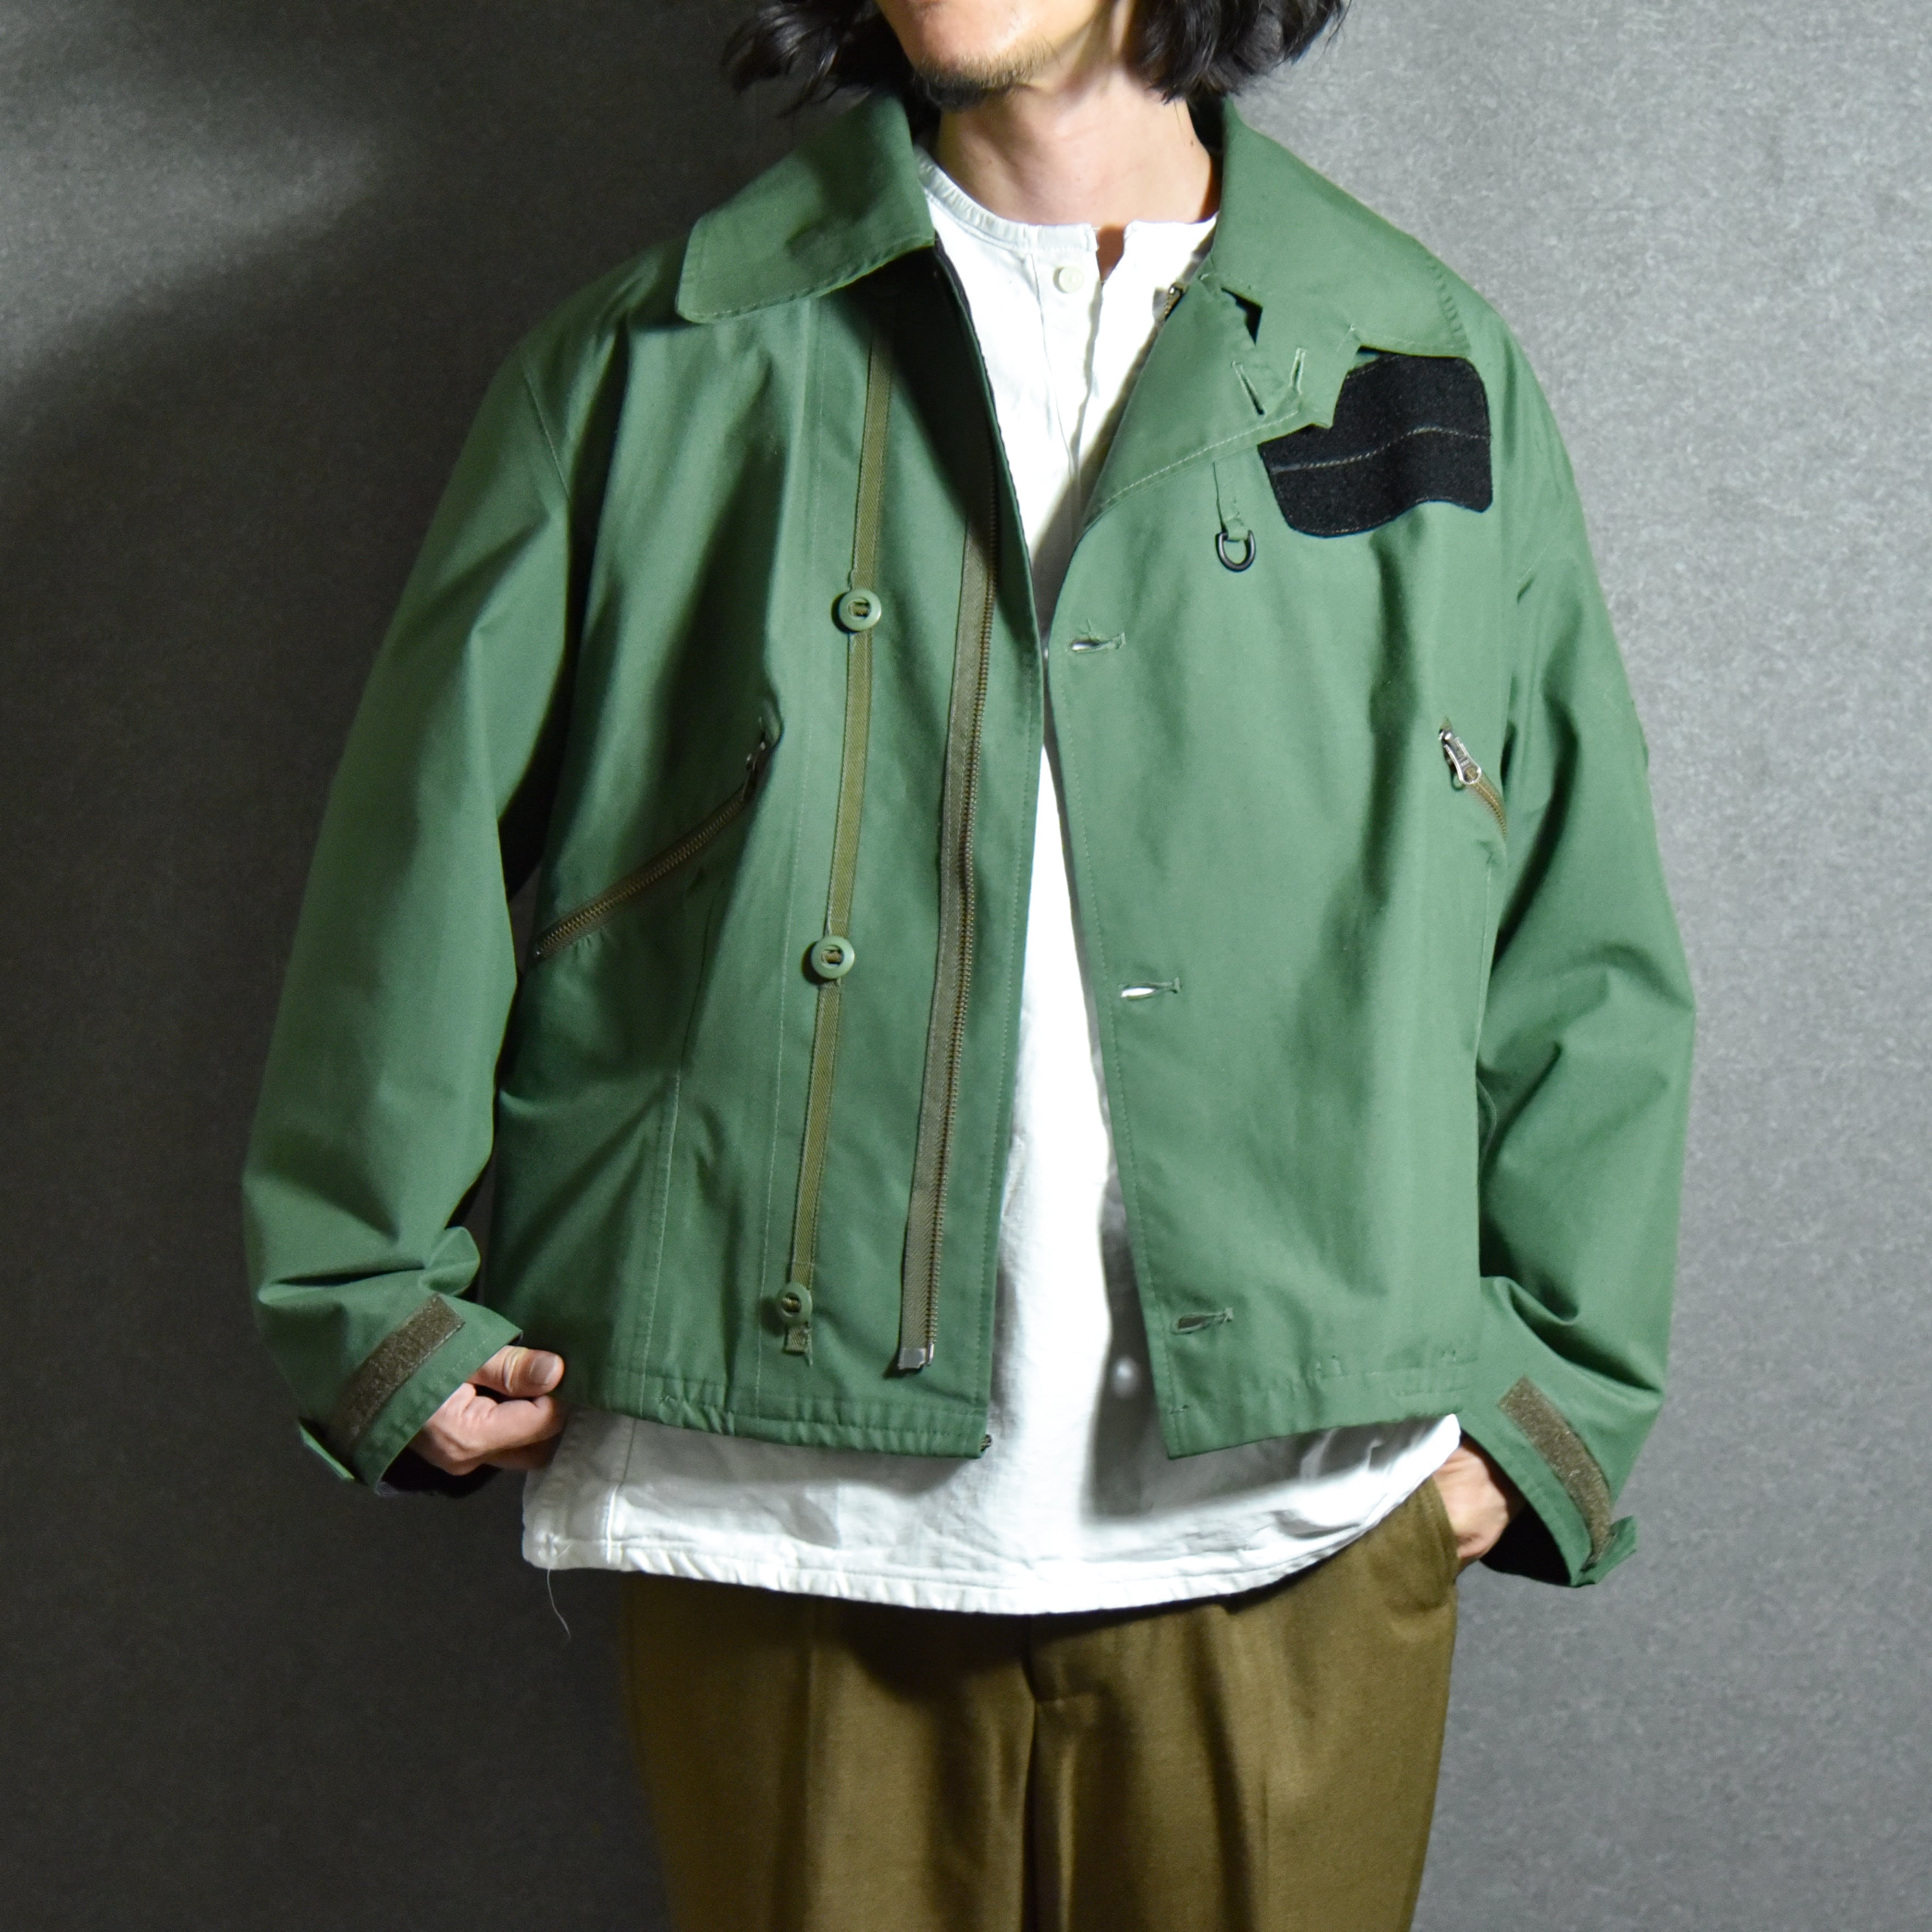 90s deadstock usa製 AIR FORCE ONE jacket